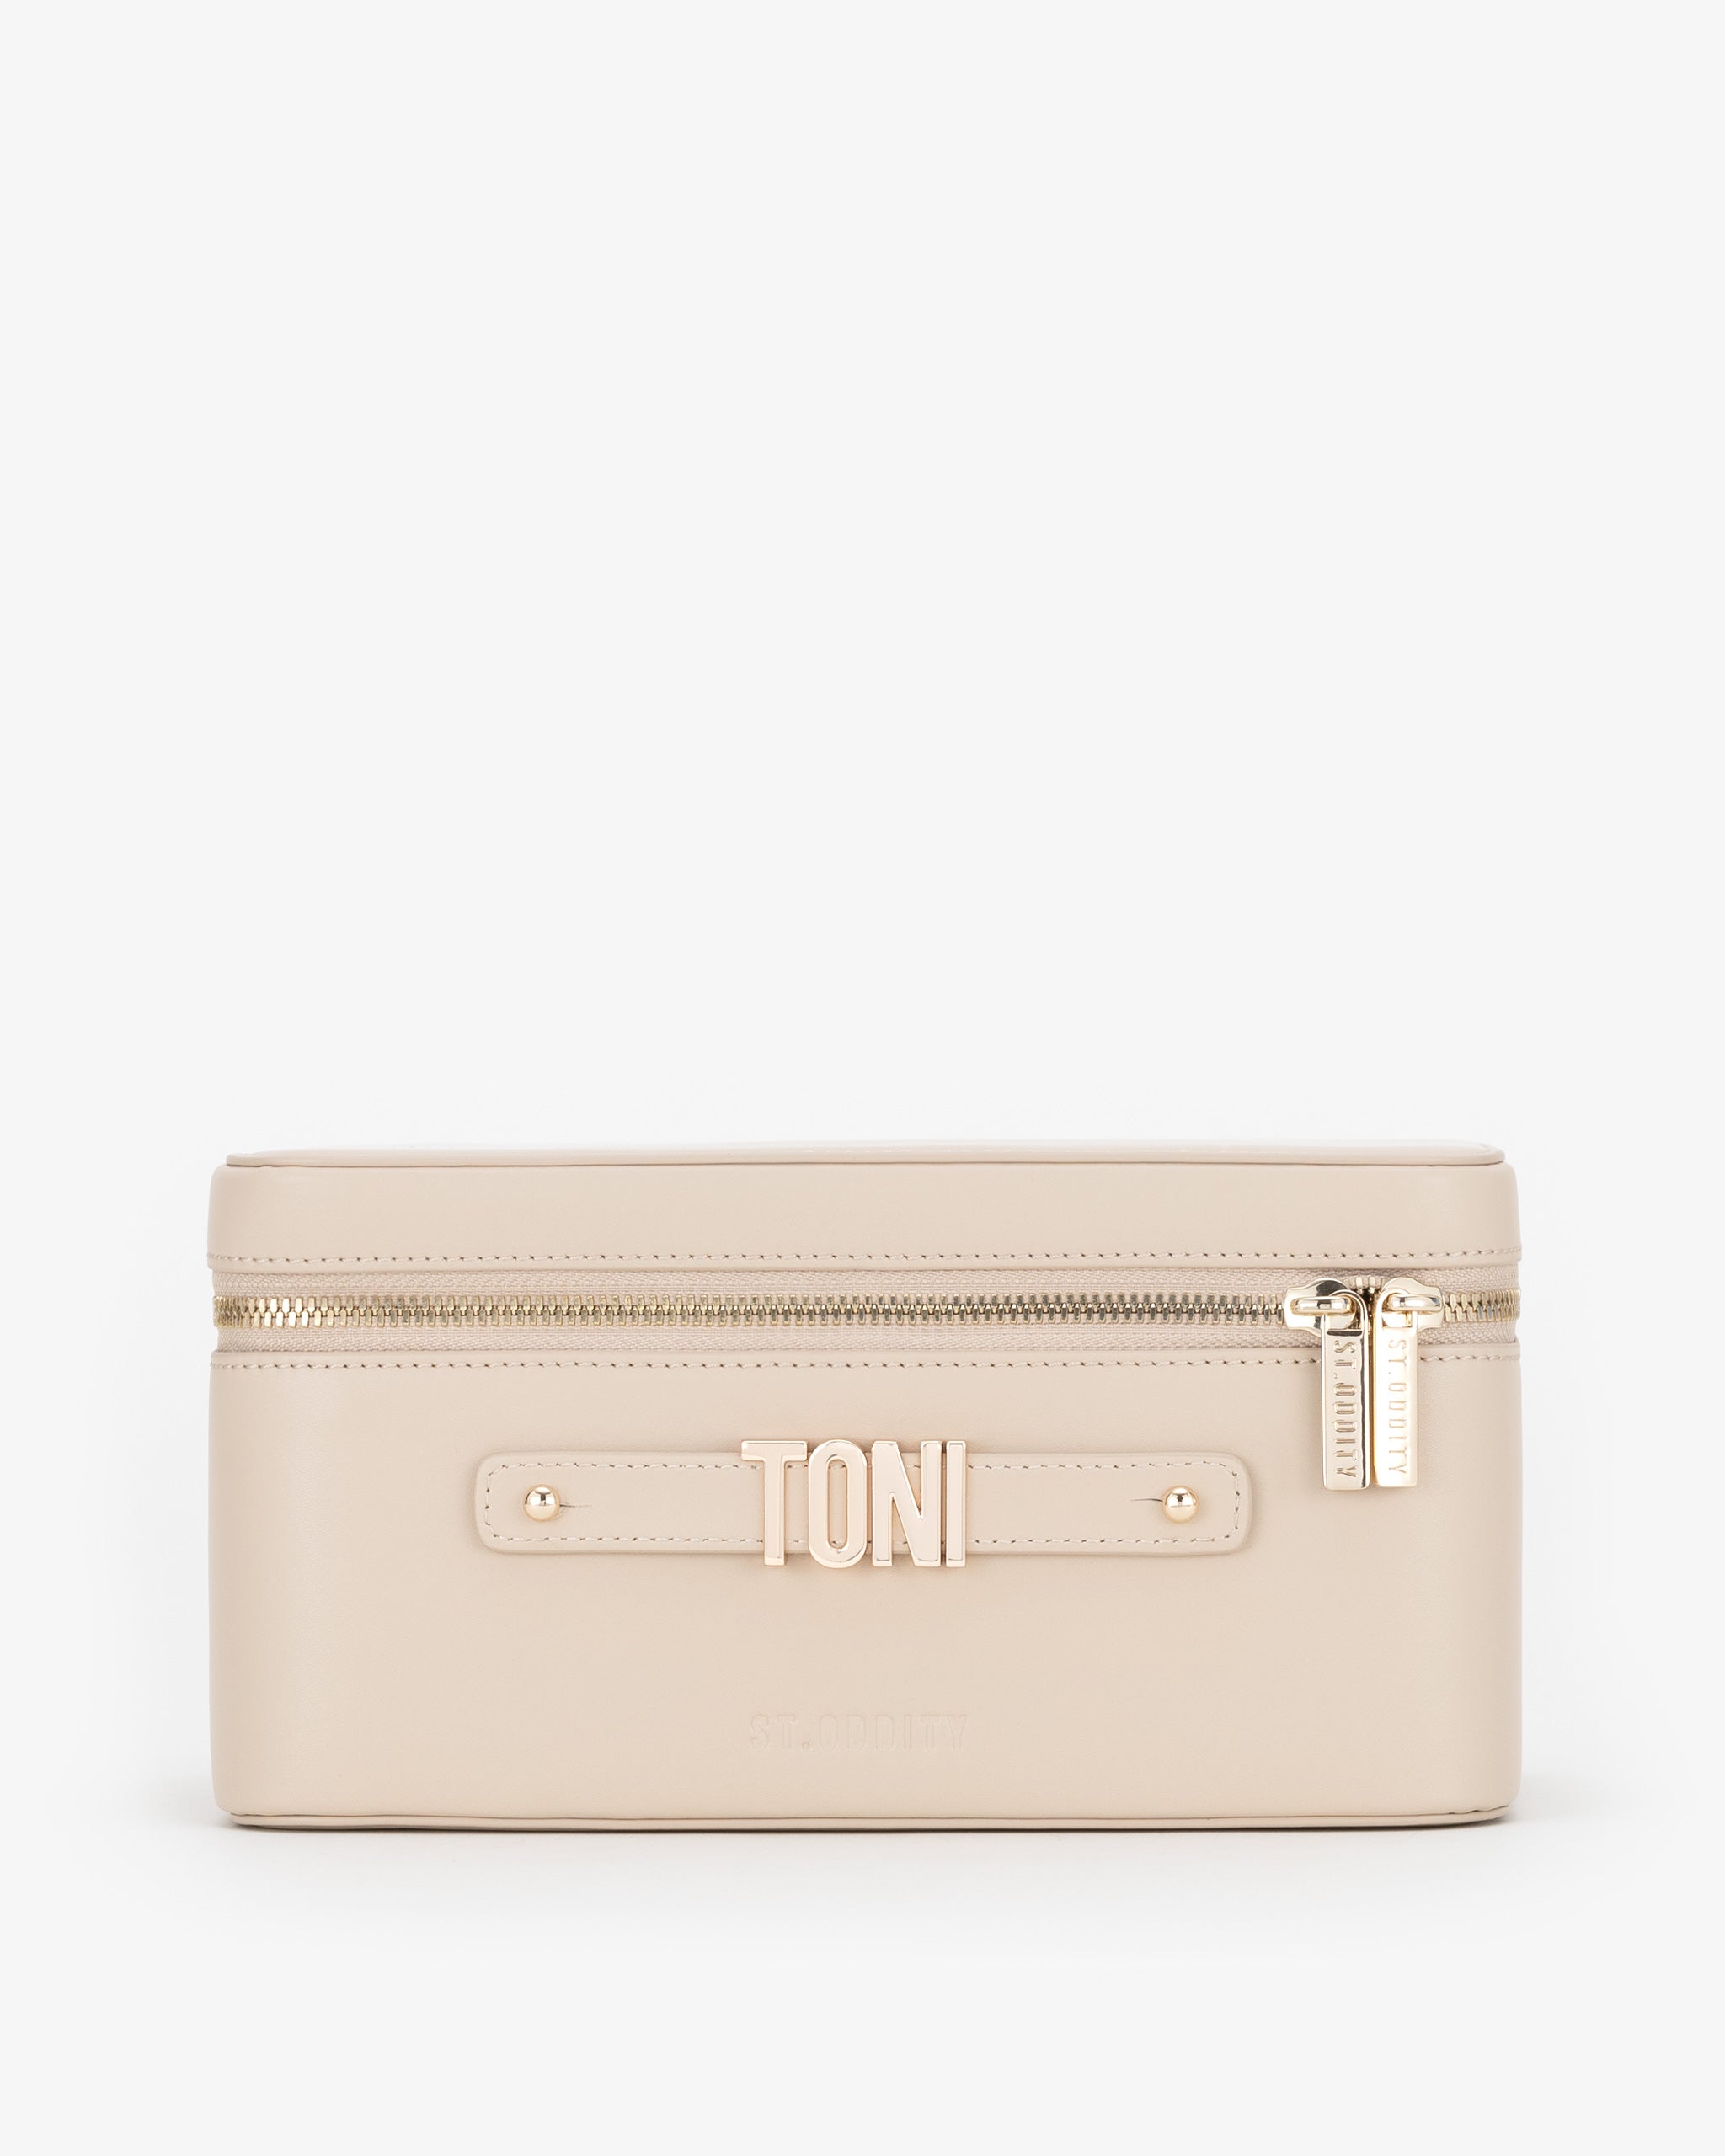 Pre-order (Mid-May): Vanity Case in Light Sand with Personalised Hardware